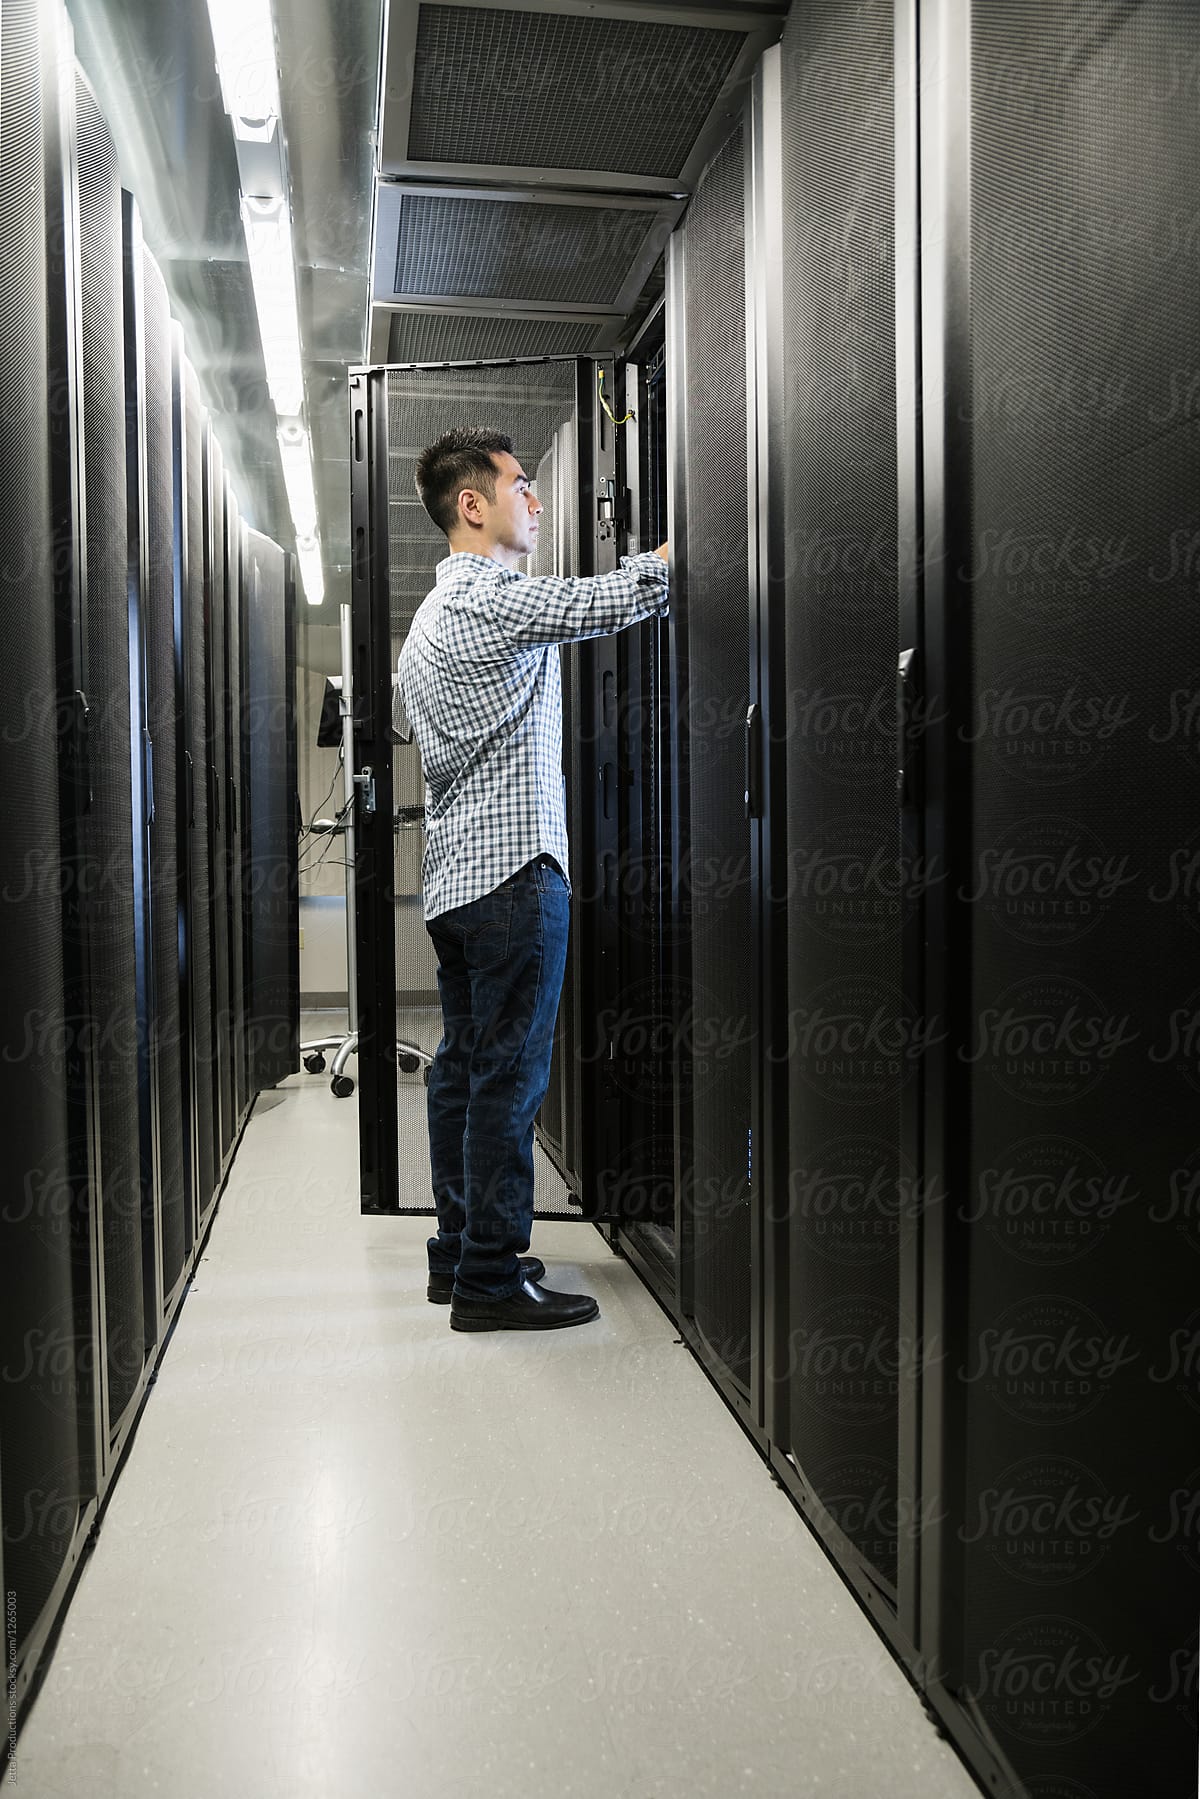 Vertical shot of technician working on a server in a cabinet in